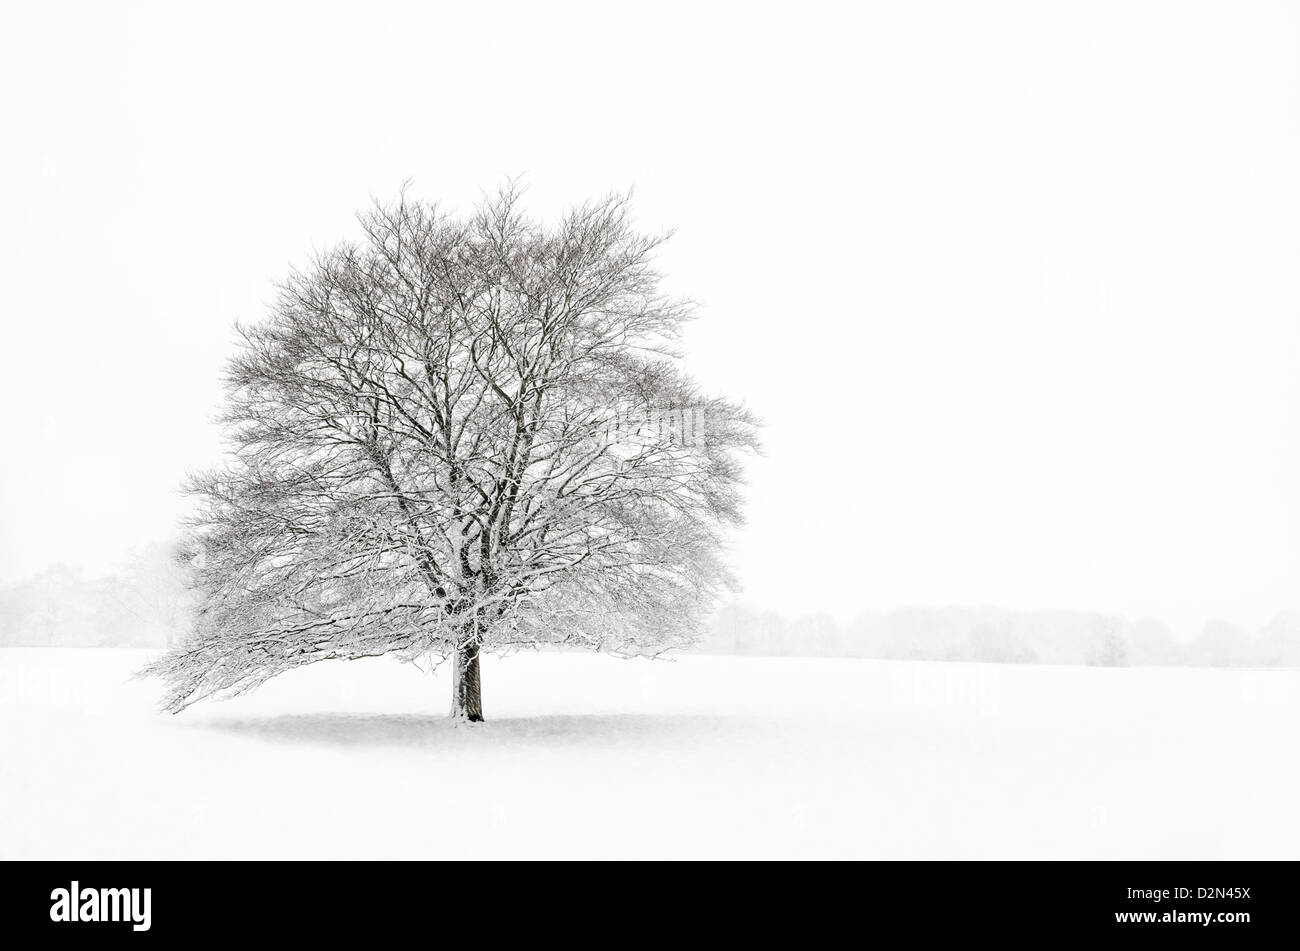 A single tree in a field during a snowstorm. Stock Photo